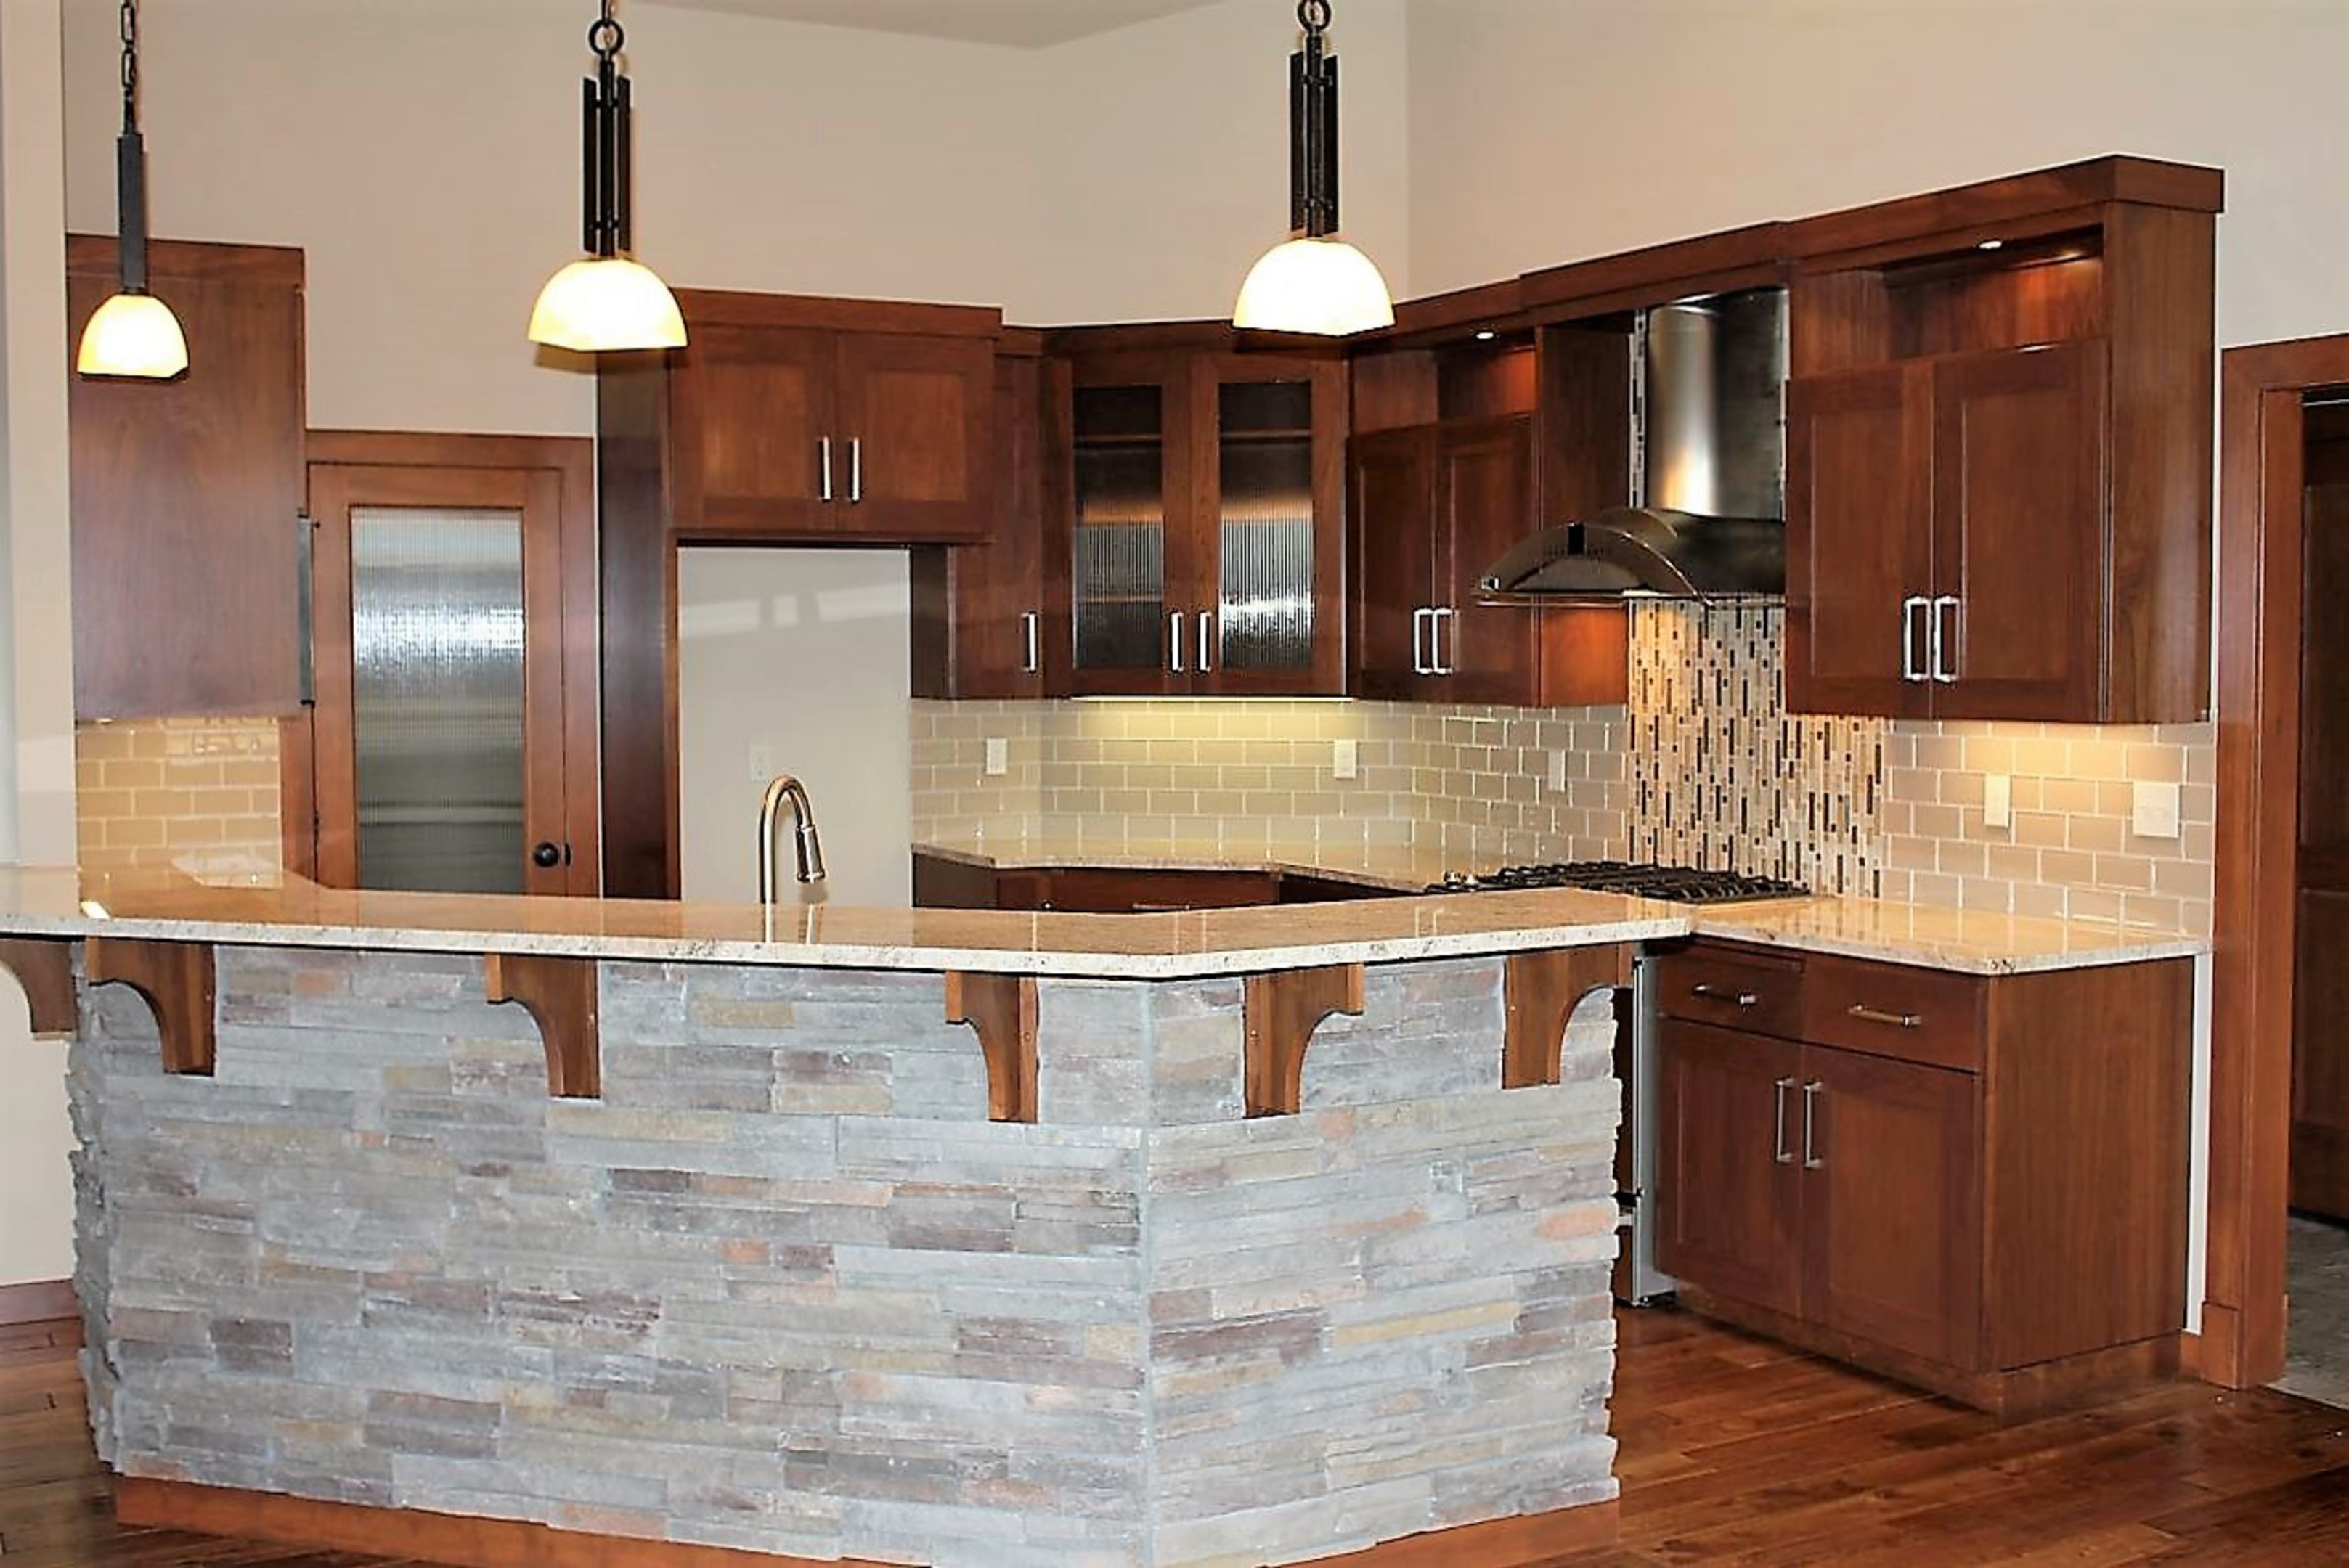 Kitchen  contemporary style  walnut  dark color  recessed panel  full overlay  rock island back   4 bar supports  reeded glass doors  chimney style hood with top  open space at top of the uppers